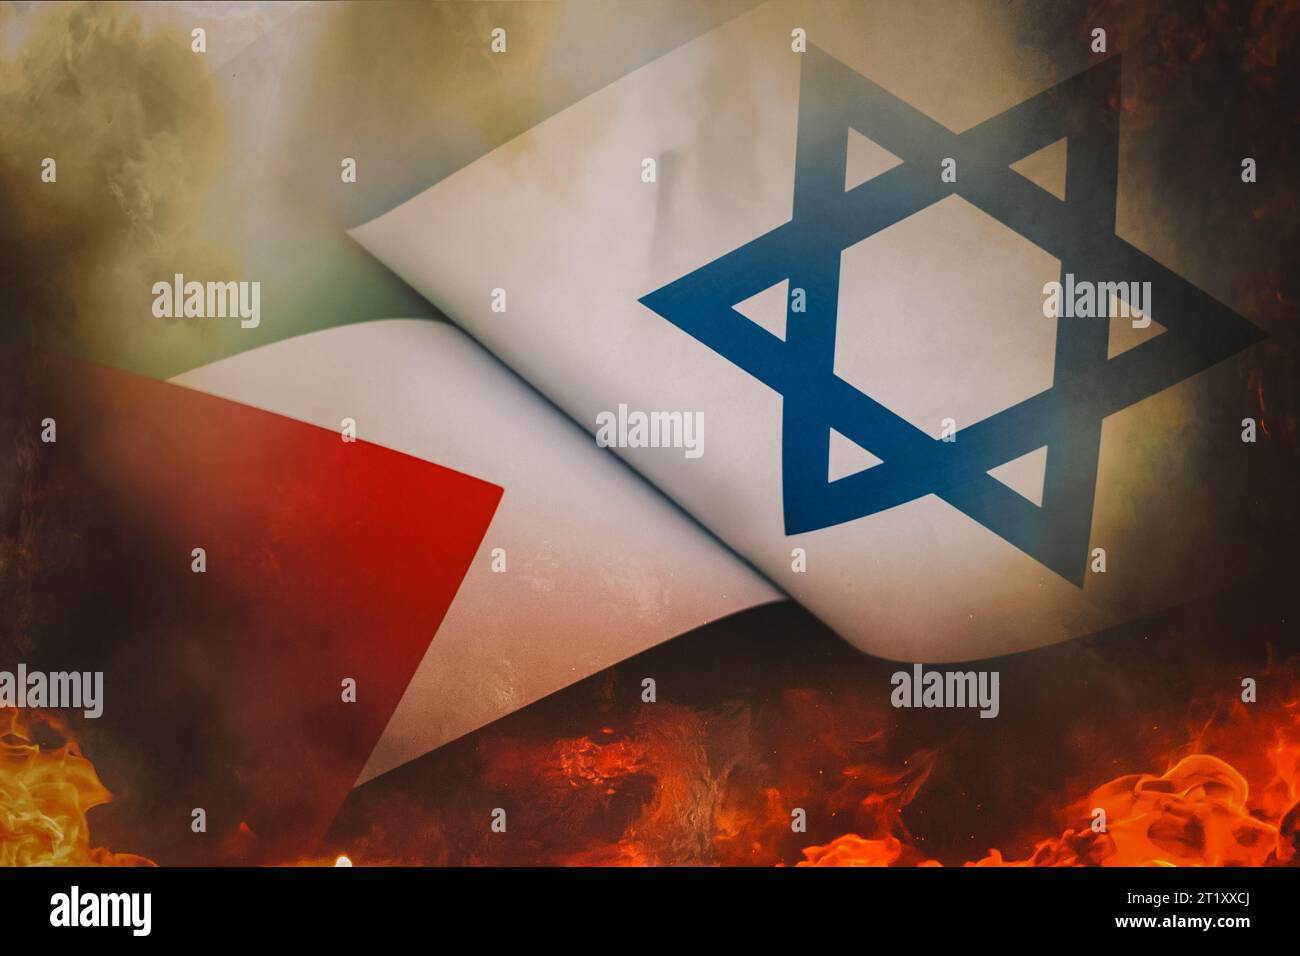 Flags of Israel and Palestine painted on cracked wall background. Concept of the Conflict between Israel and Palestinian Authorities. Stock Photo